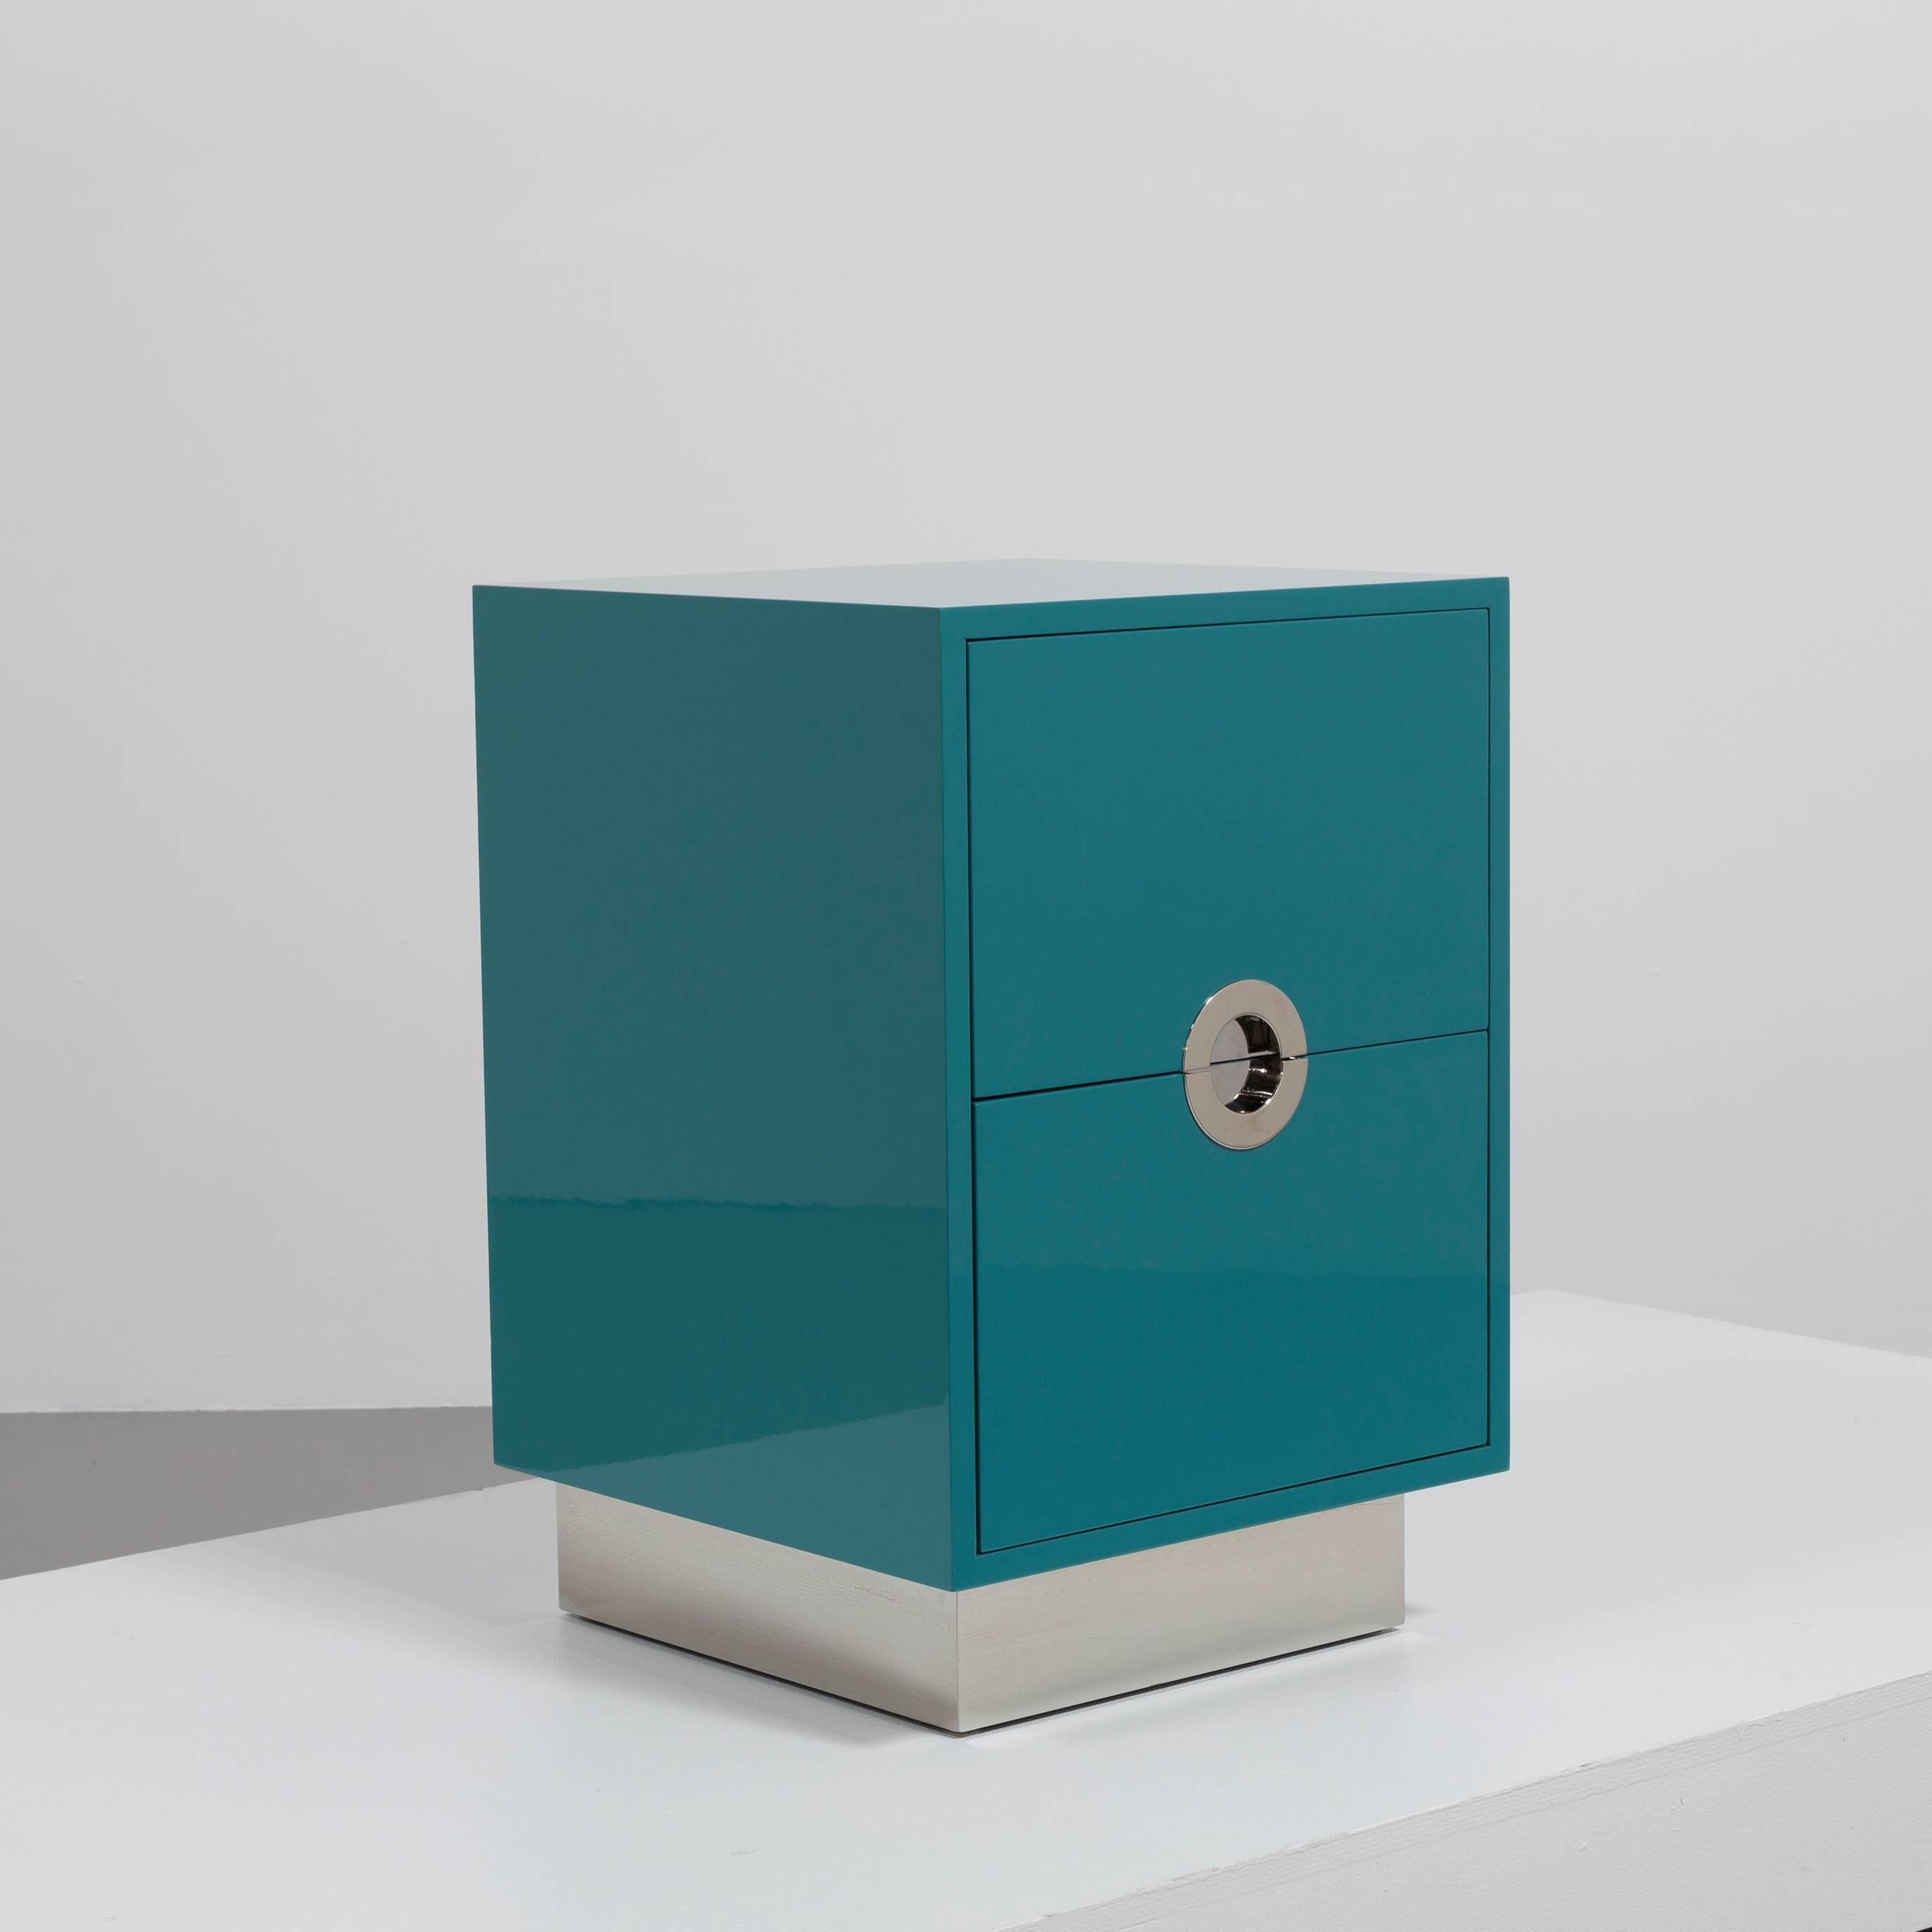 A standard single teal blue lacquered porthole bedside cabinet by Talisman Bespoke

This 1970s inspired design is available in a wide range of lacquer colors (RAL or paint colors can be specified) with either brass or steel metalwork. These